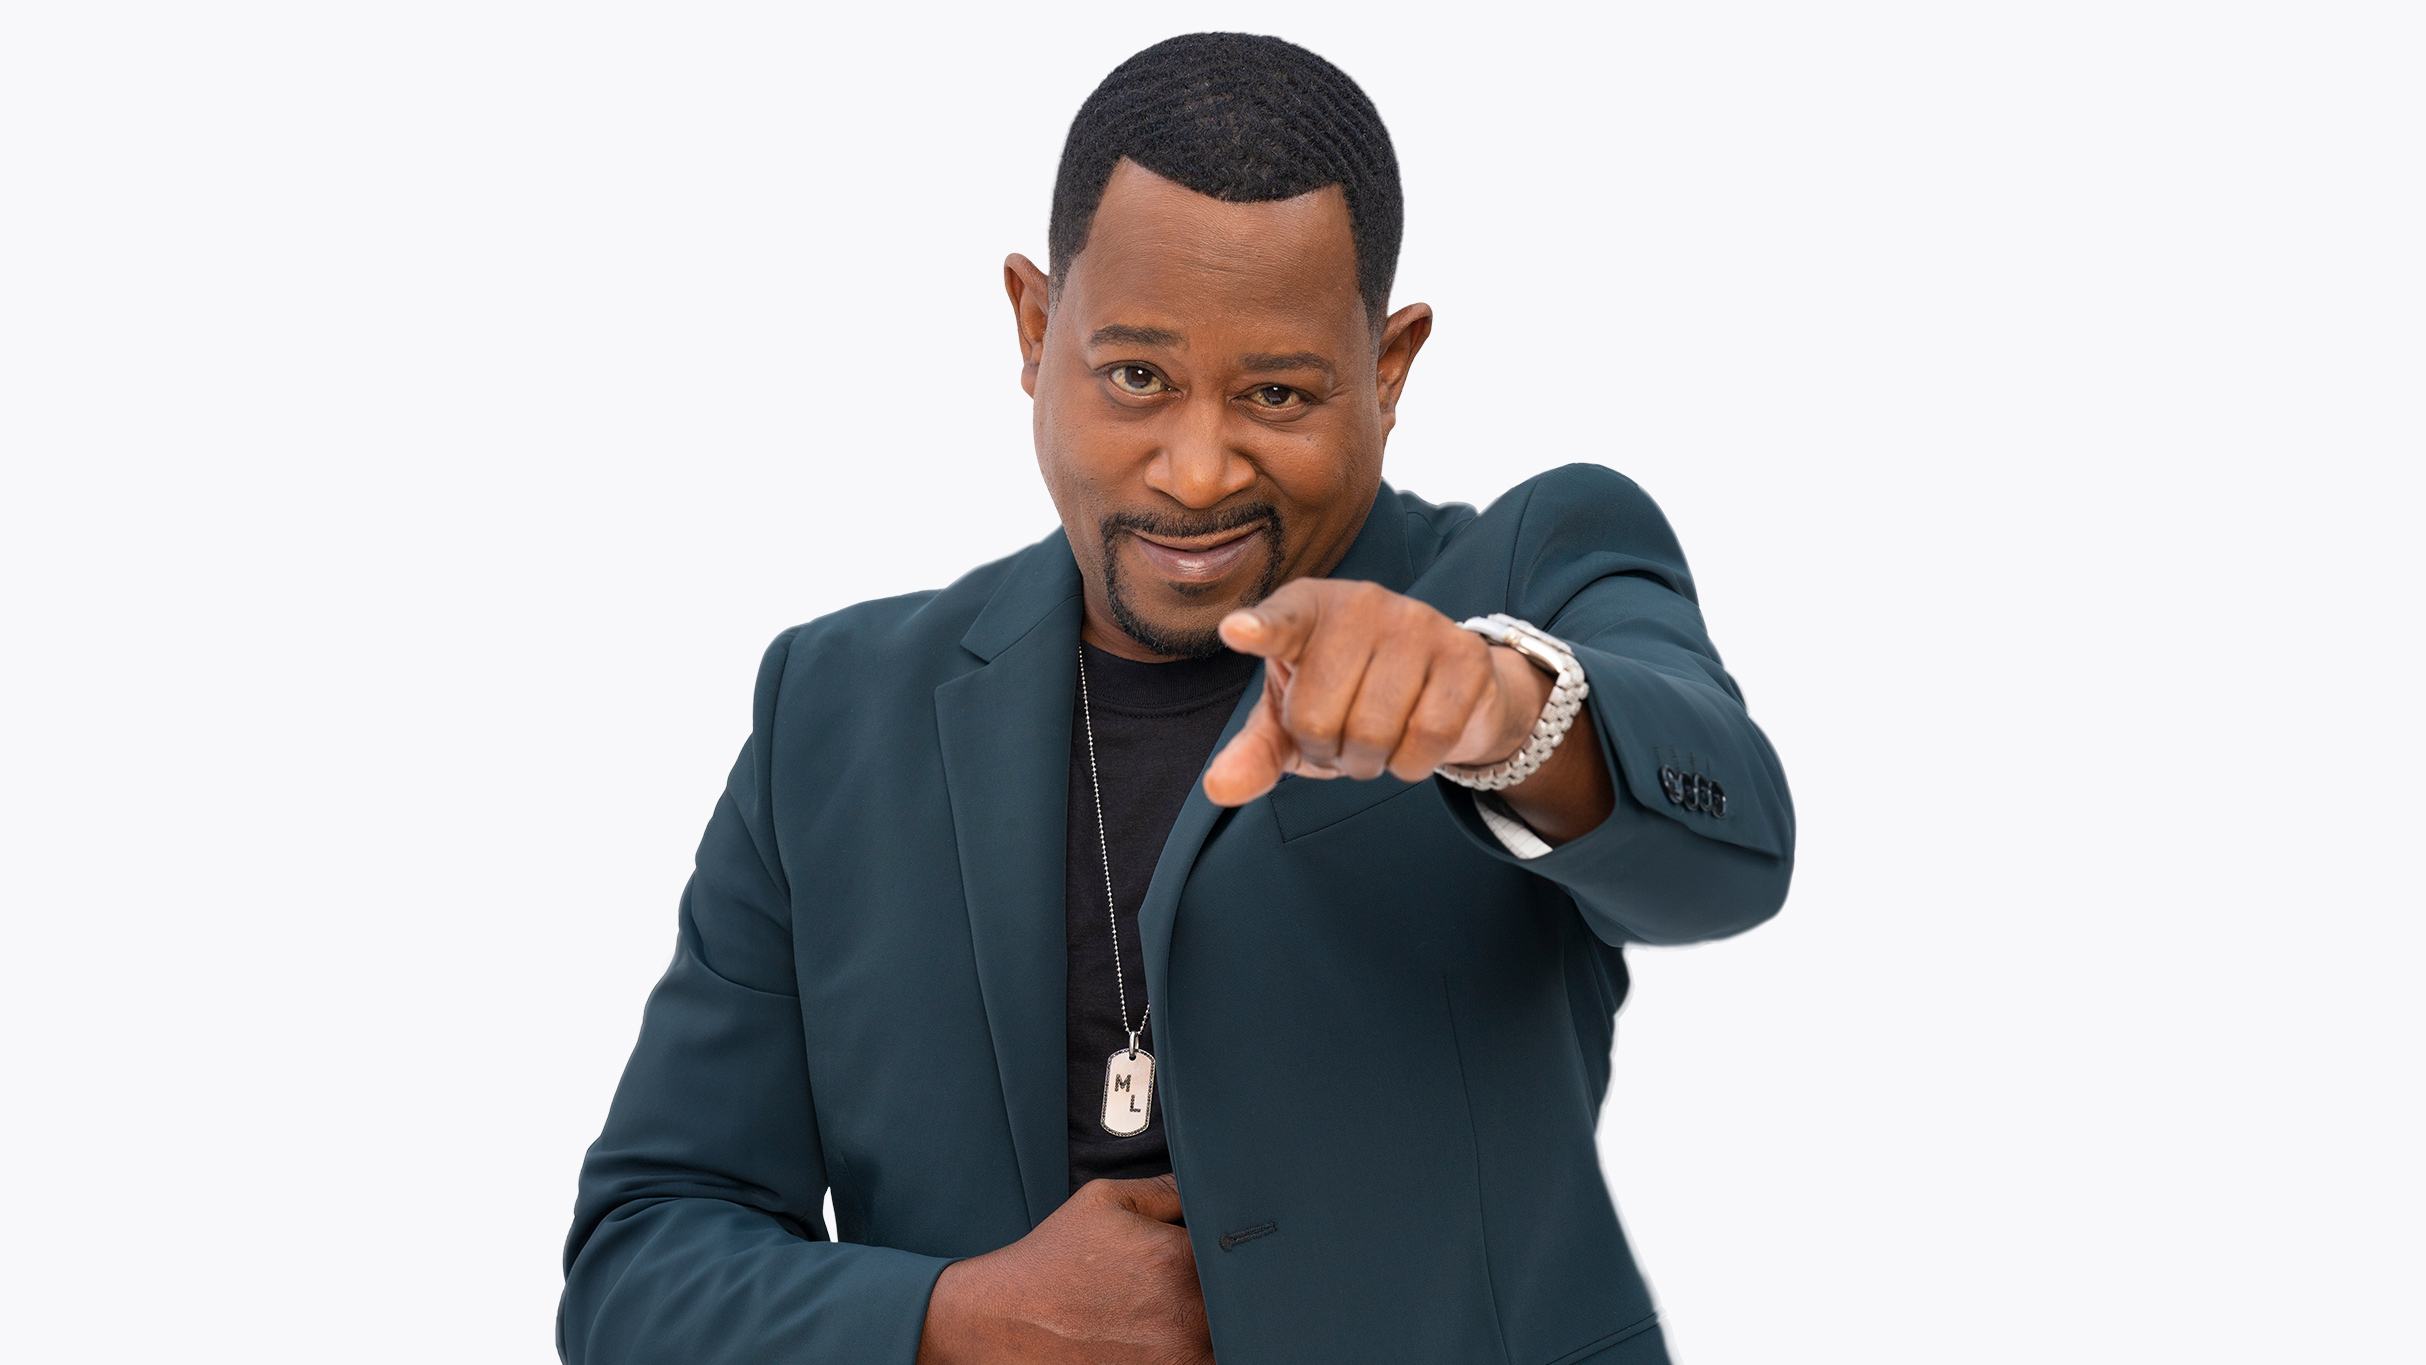 Martin Lawrence with special guest Jess Hilarious